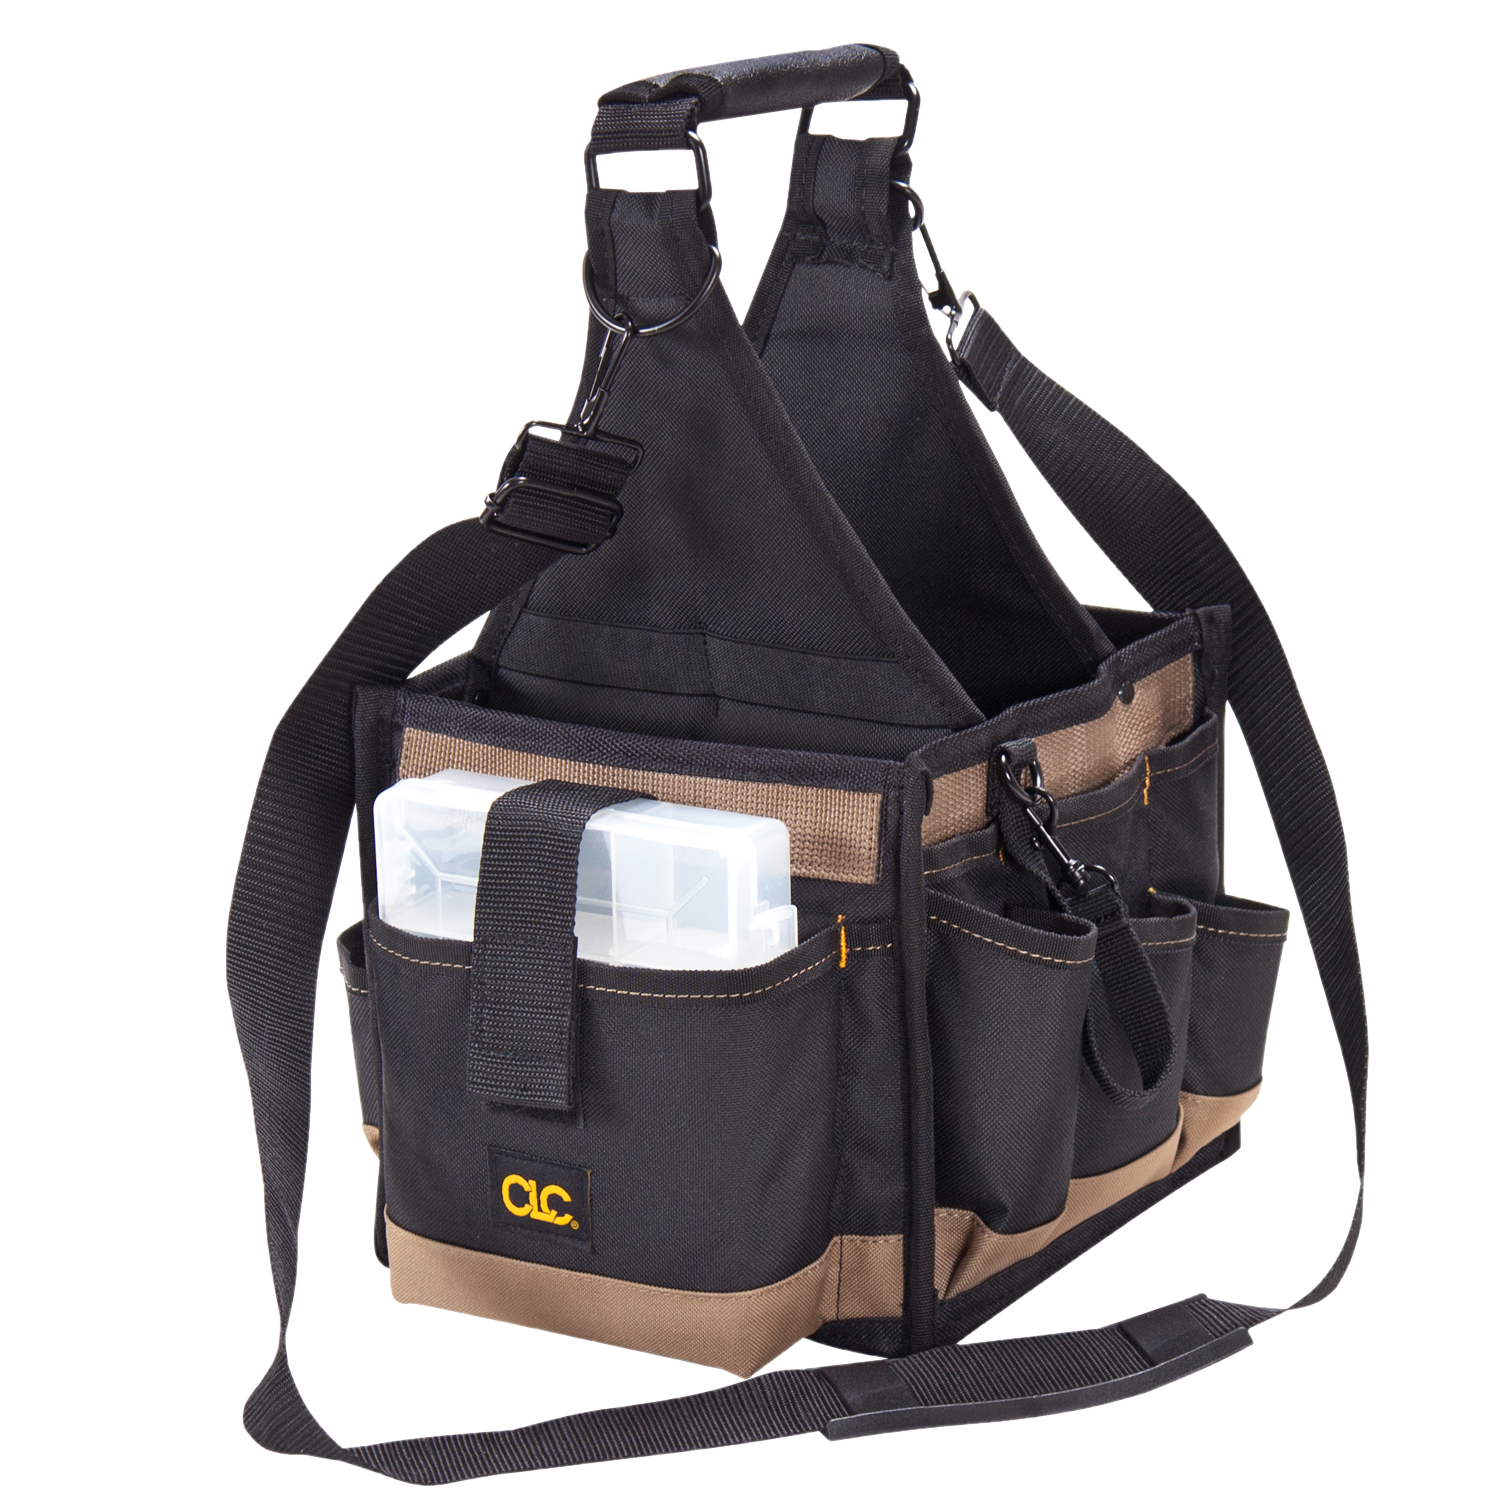 CLC Electrical & Maintenance Tool Carrier, Small